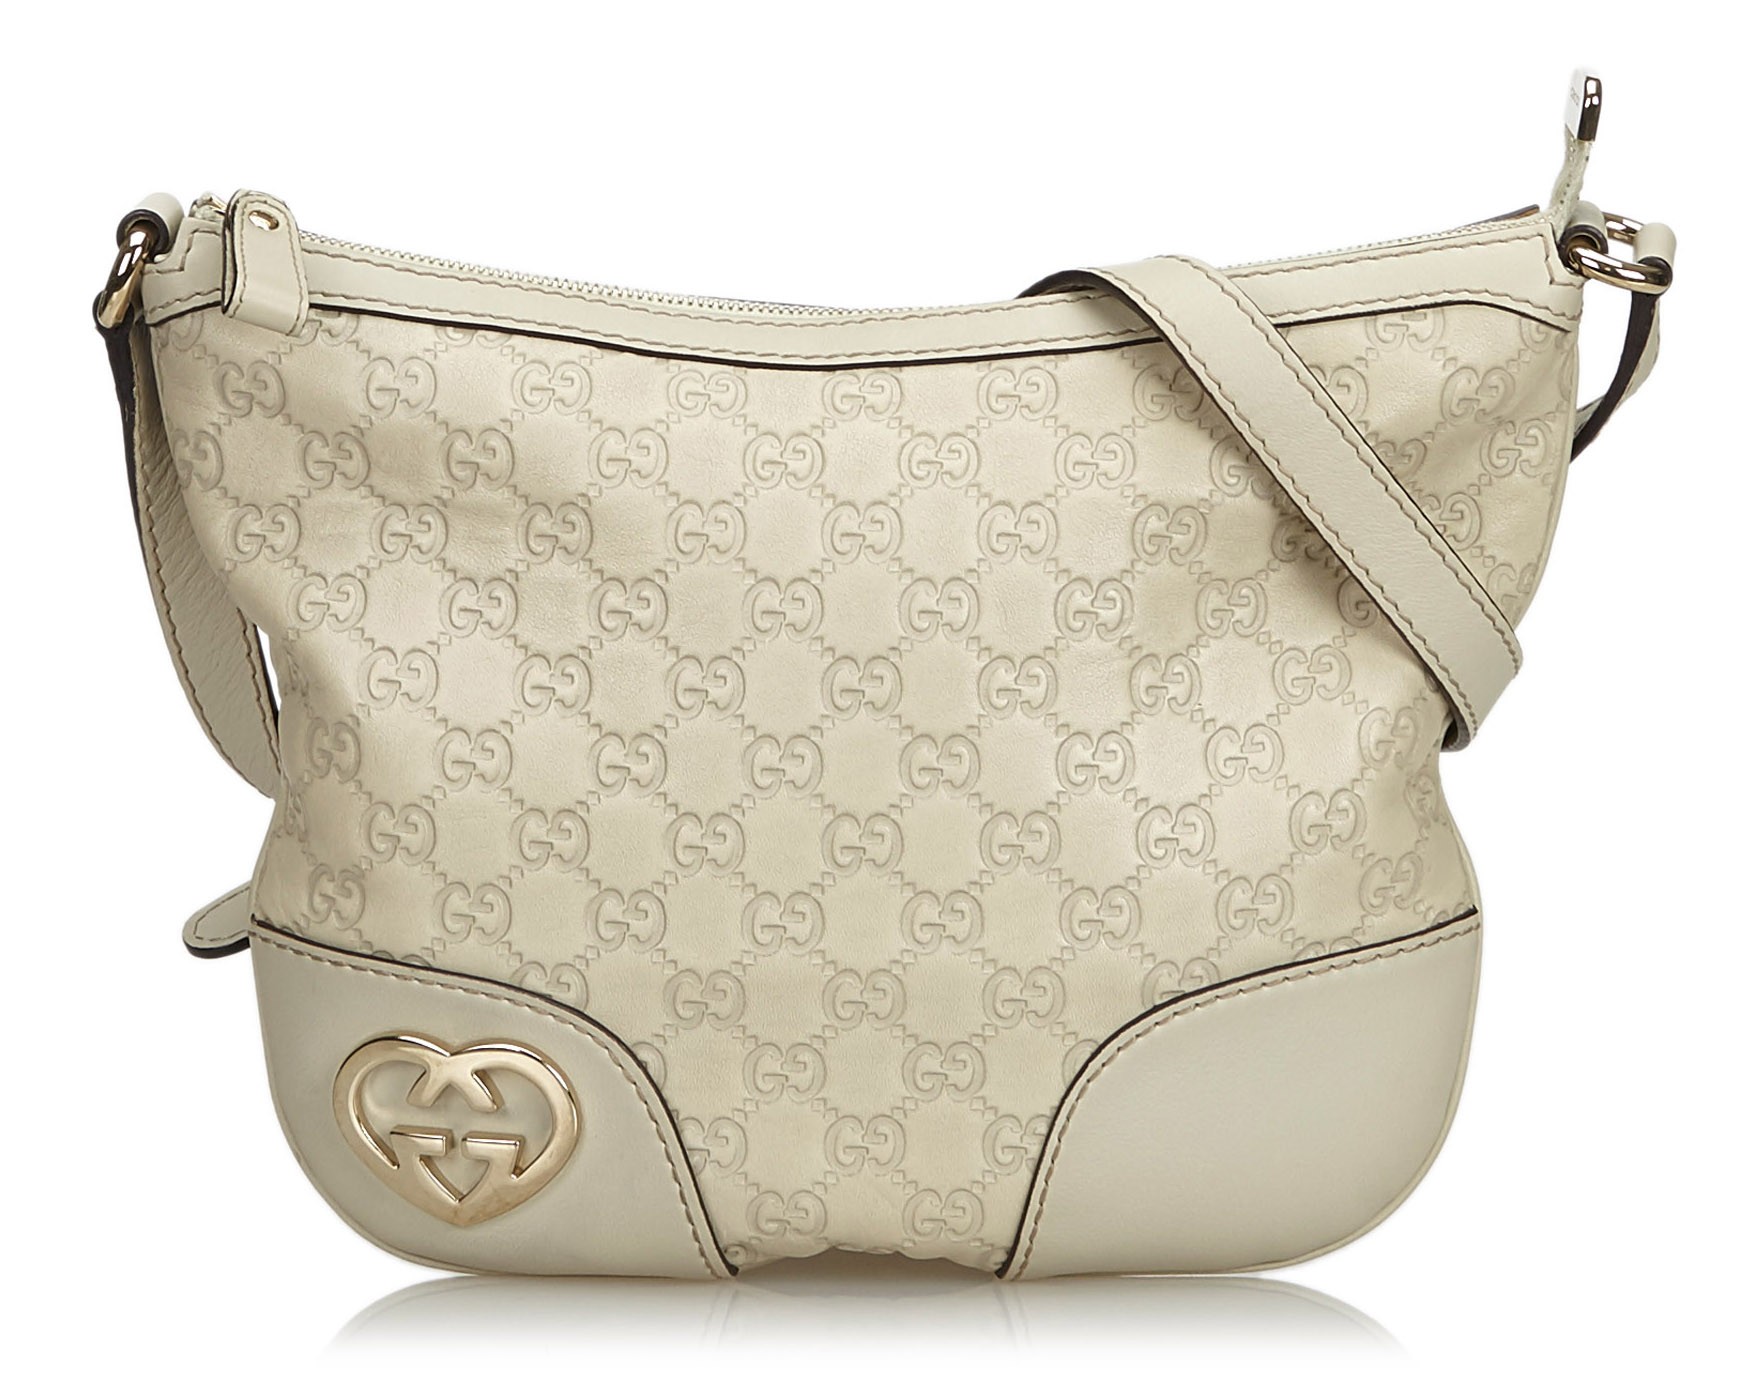 Gucci Vintage - Guccissima Lovely Bag - White - Leather Handbag - Quality - Avvenice